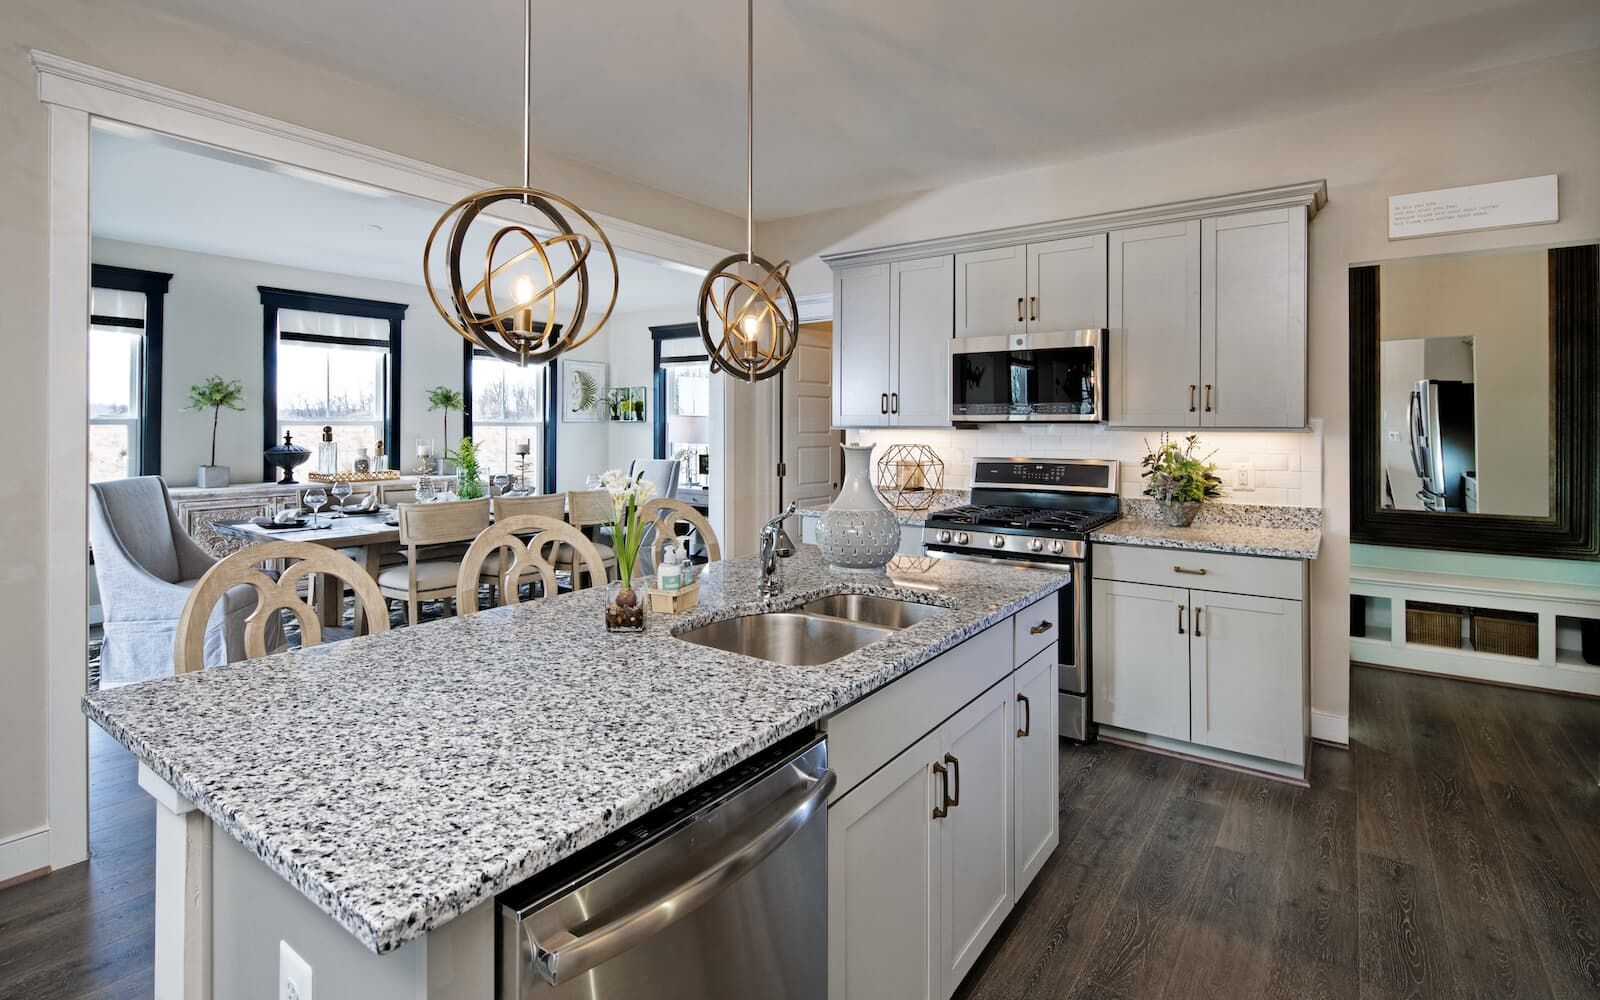 Kitchen:The kitchen of the Sheridan by Brookfield Residential in Snowden Bridge